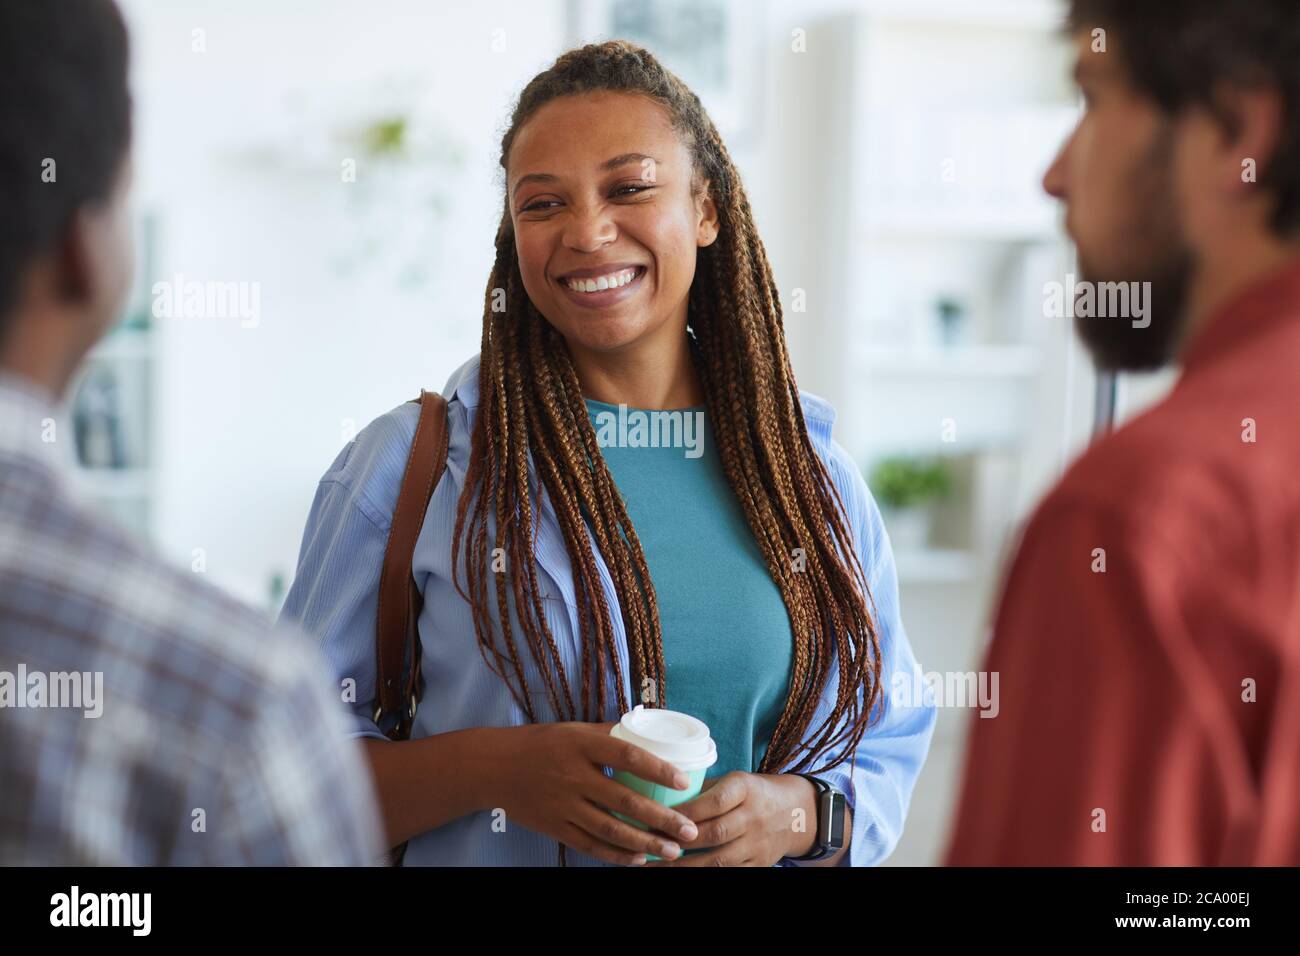 Waist up portrait of contemporary African-American woman smiling happily while talking to friends or colleagues indoors, copy space Stock Photo